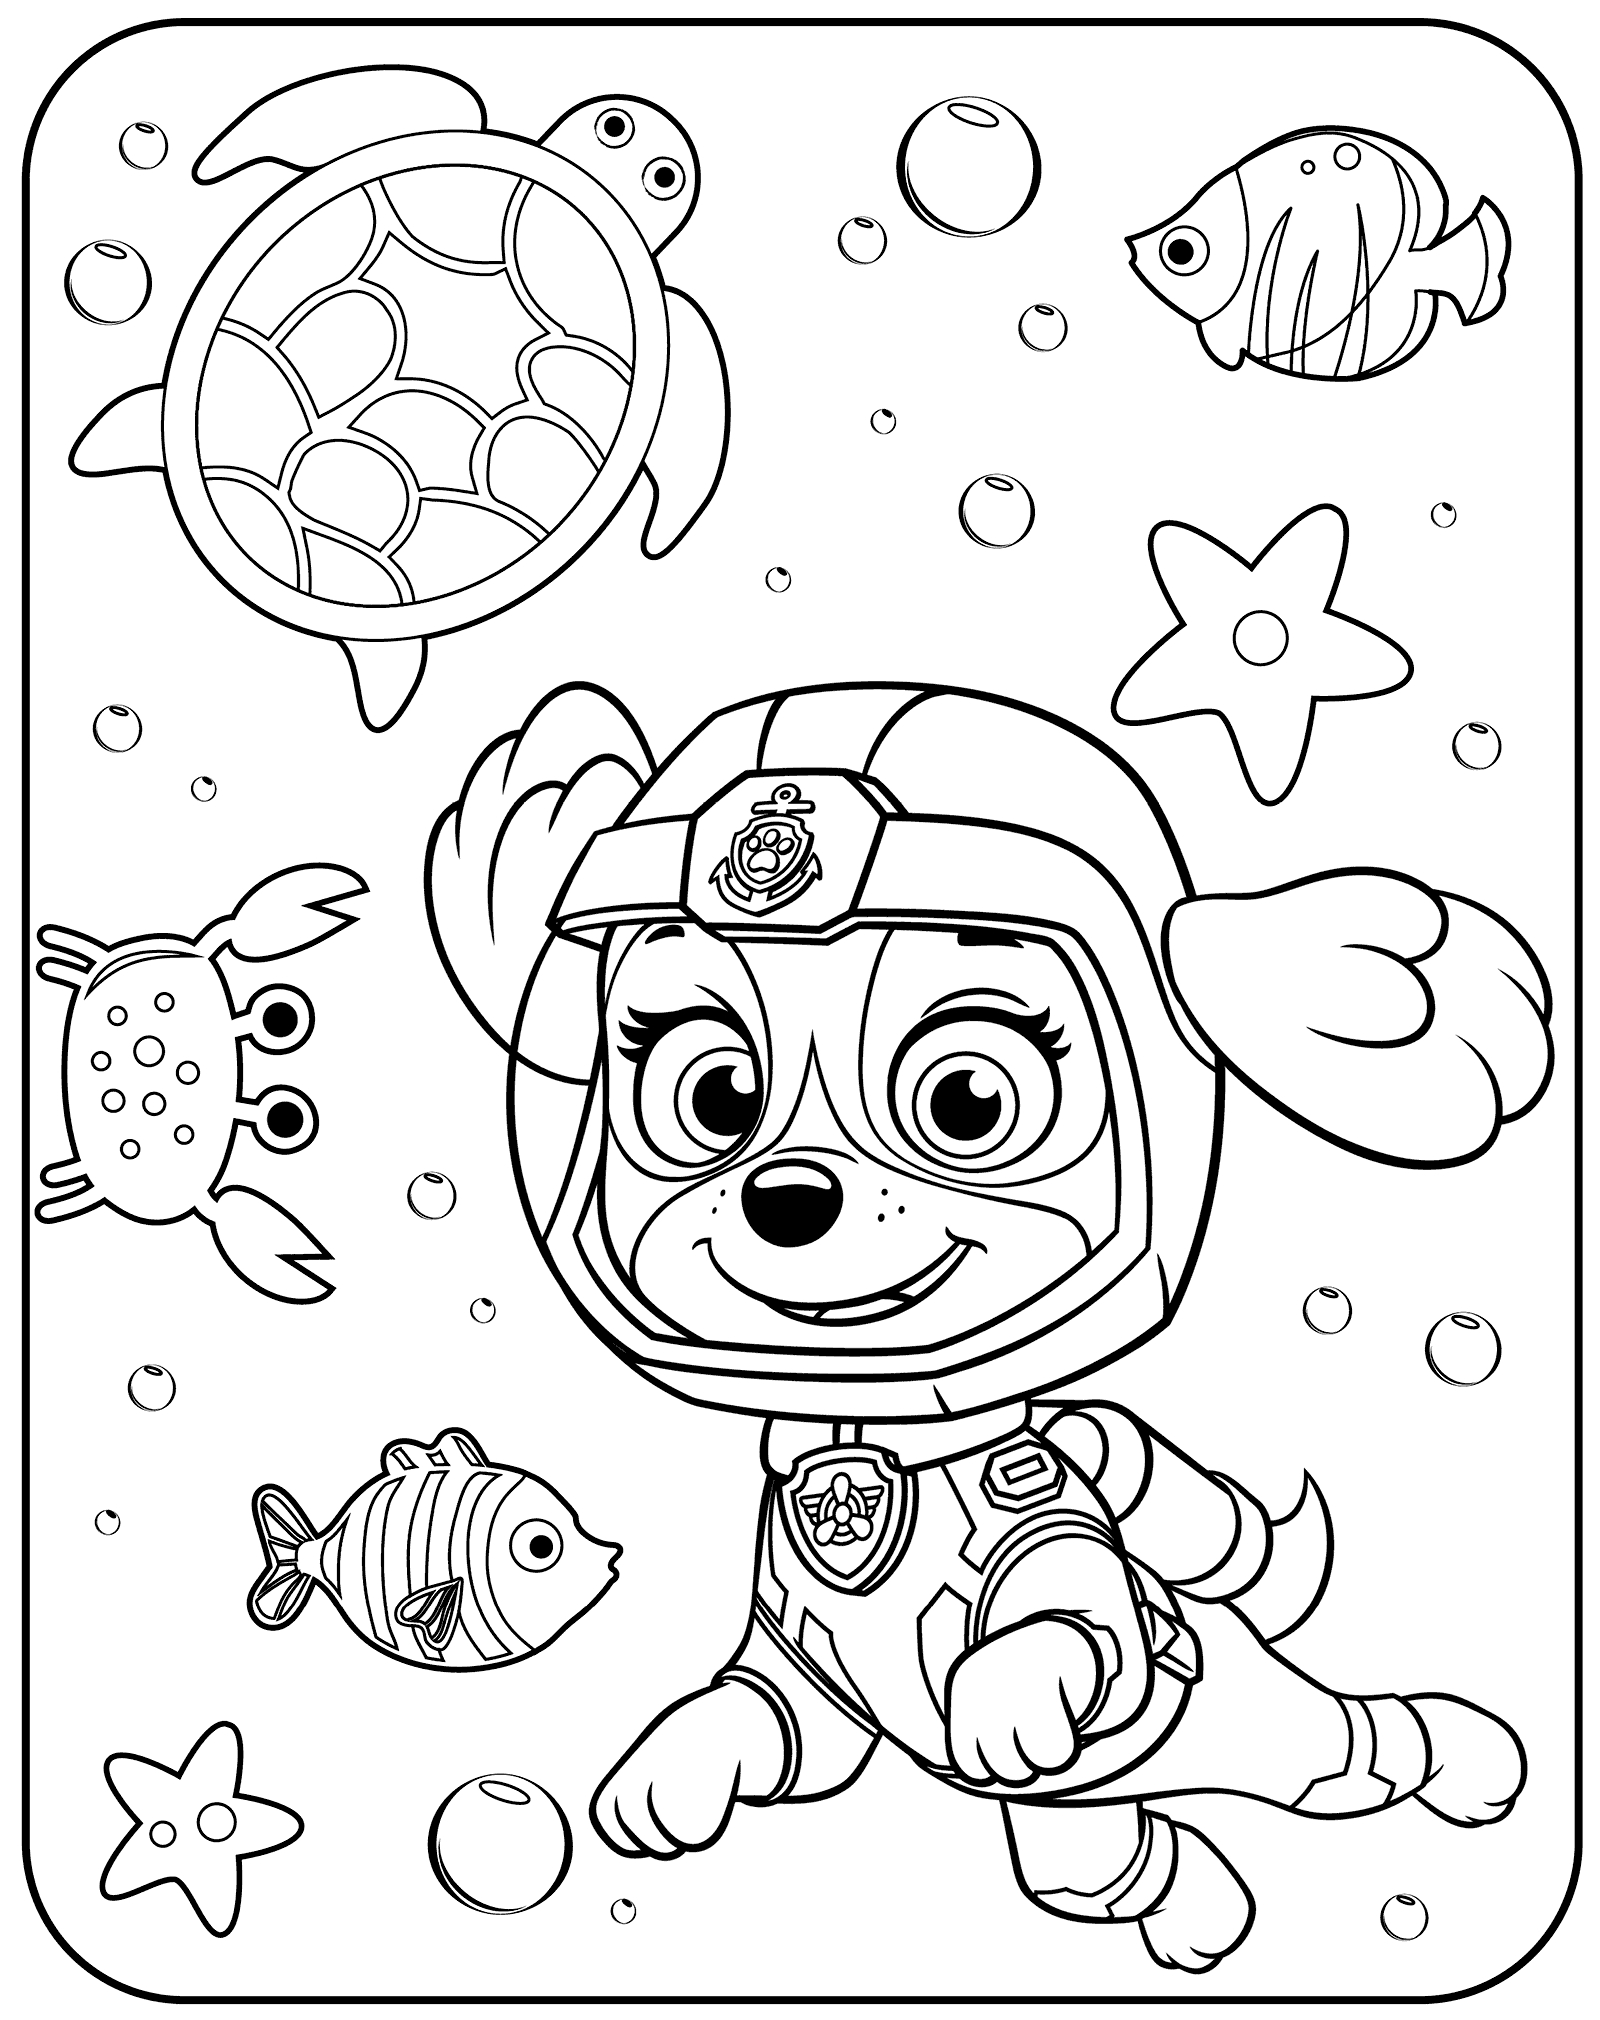 paw patrol characters coloring pages at getcolorings